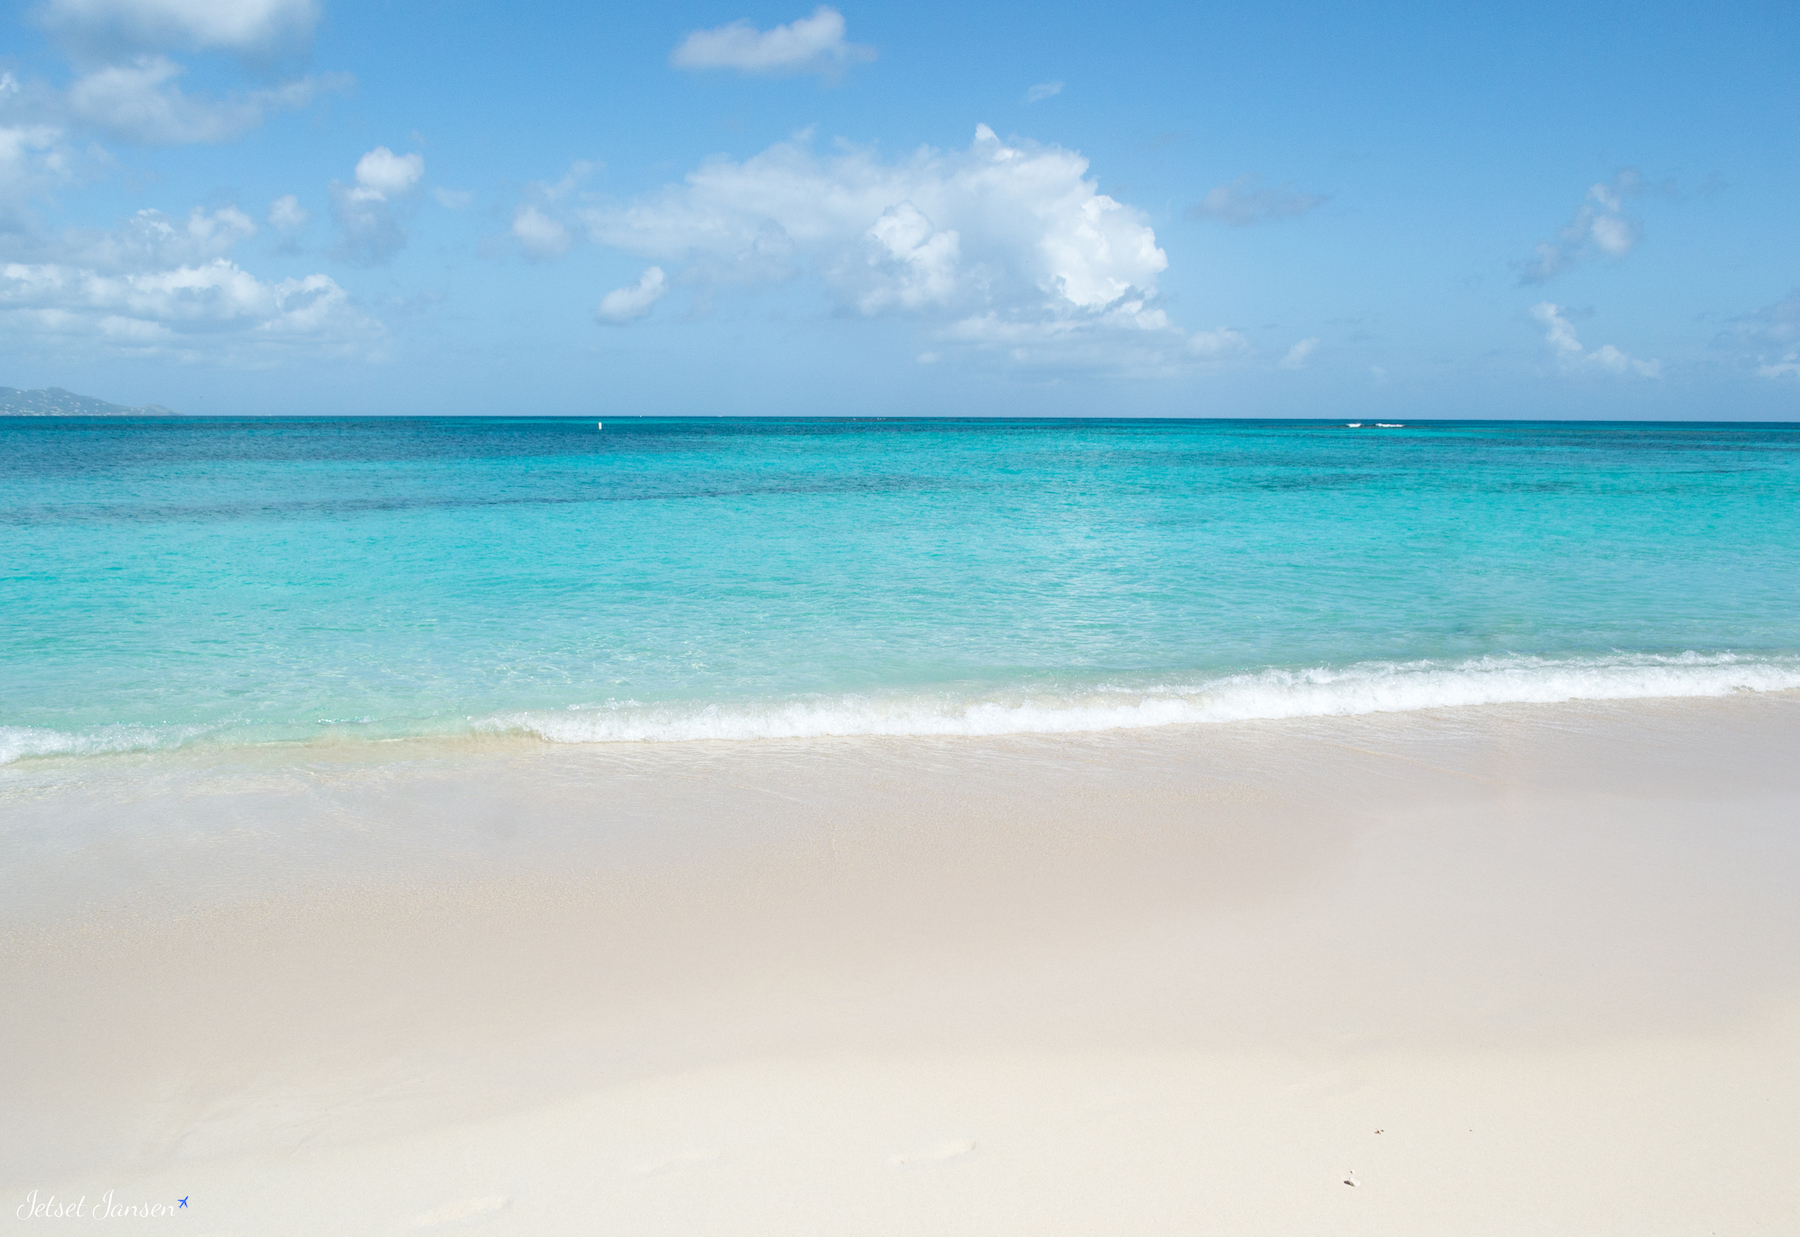 The turquoise water at Turtle Beach, St. Croix in the Caribbean.